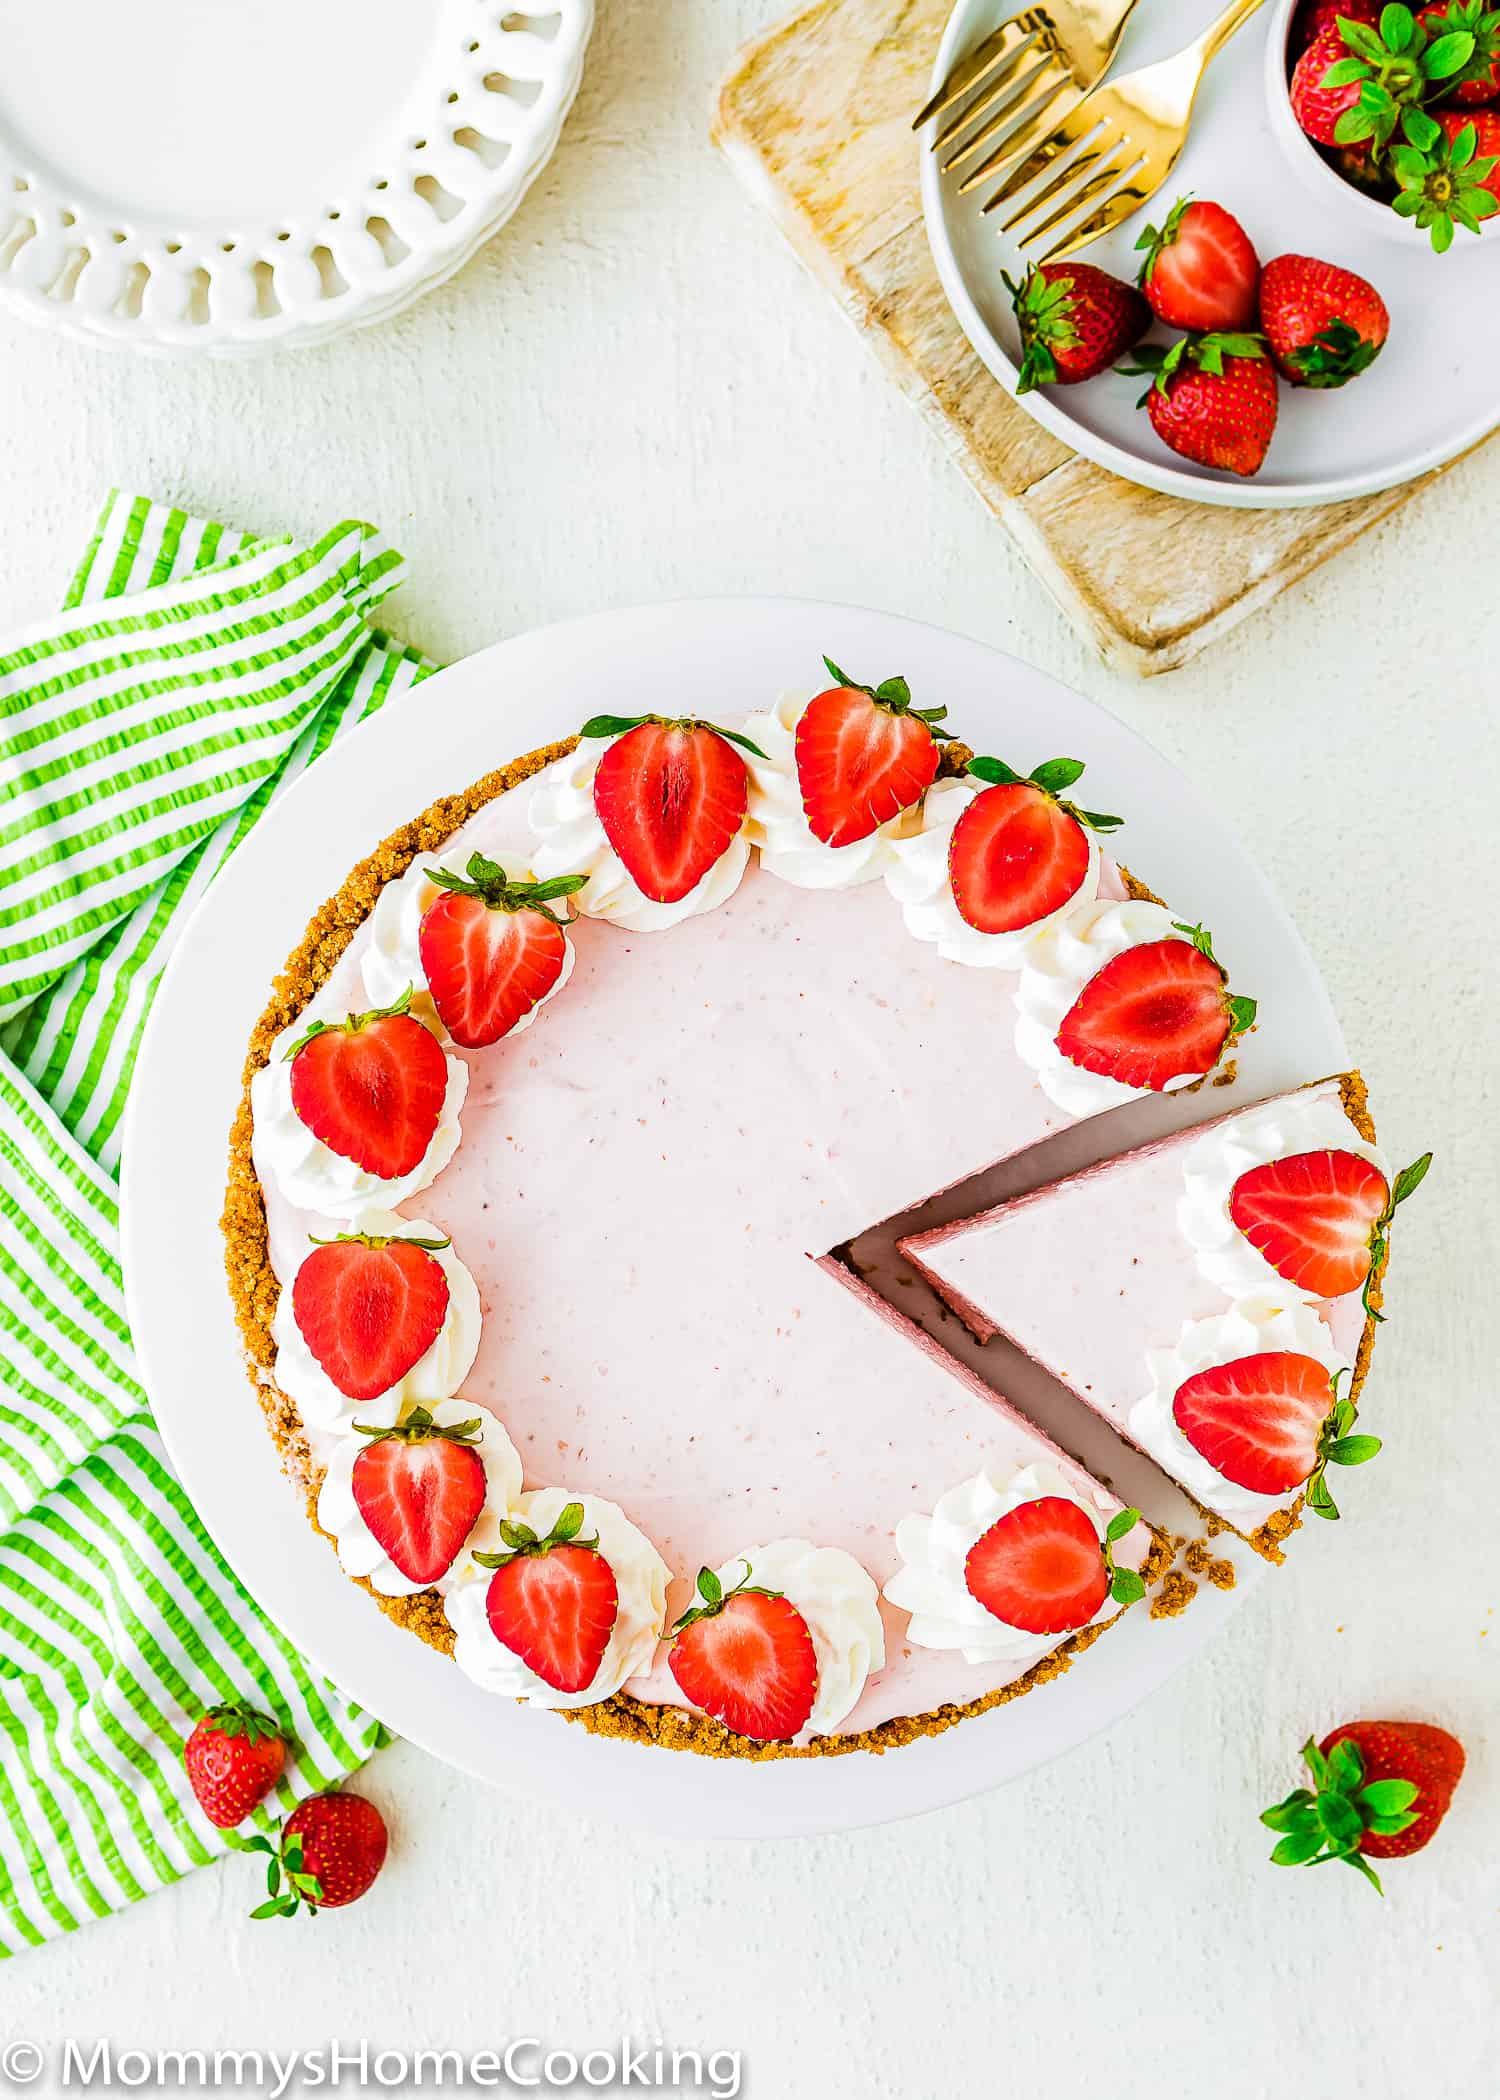 cut No-Bake Strawberry Cheesecake over a cake stand with white plates on the side and a green kitchen towel.